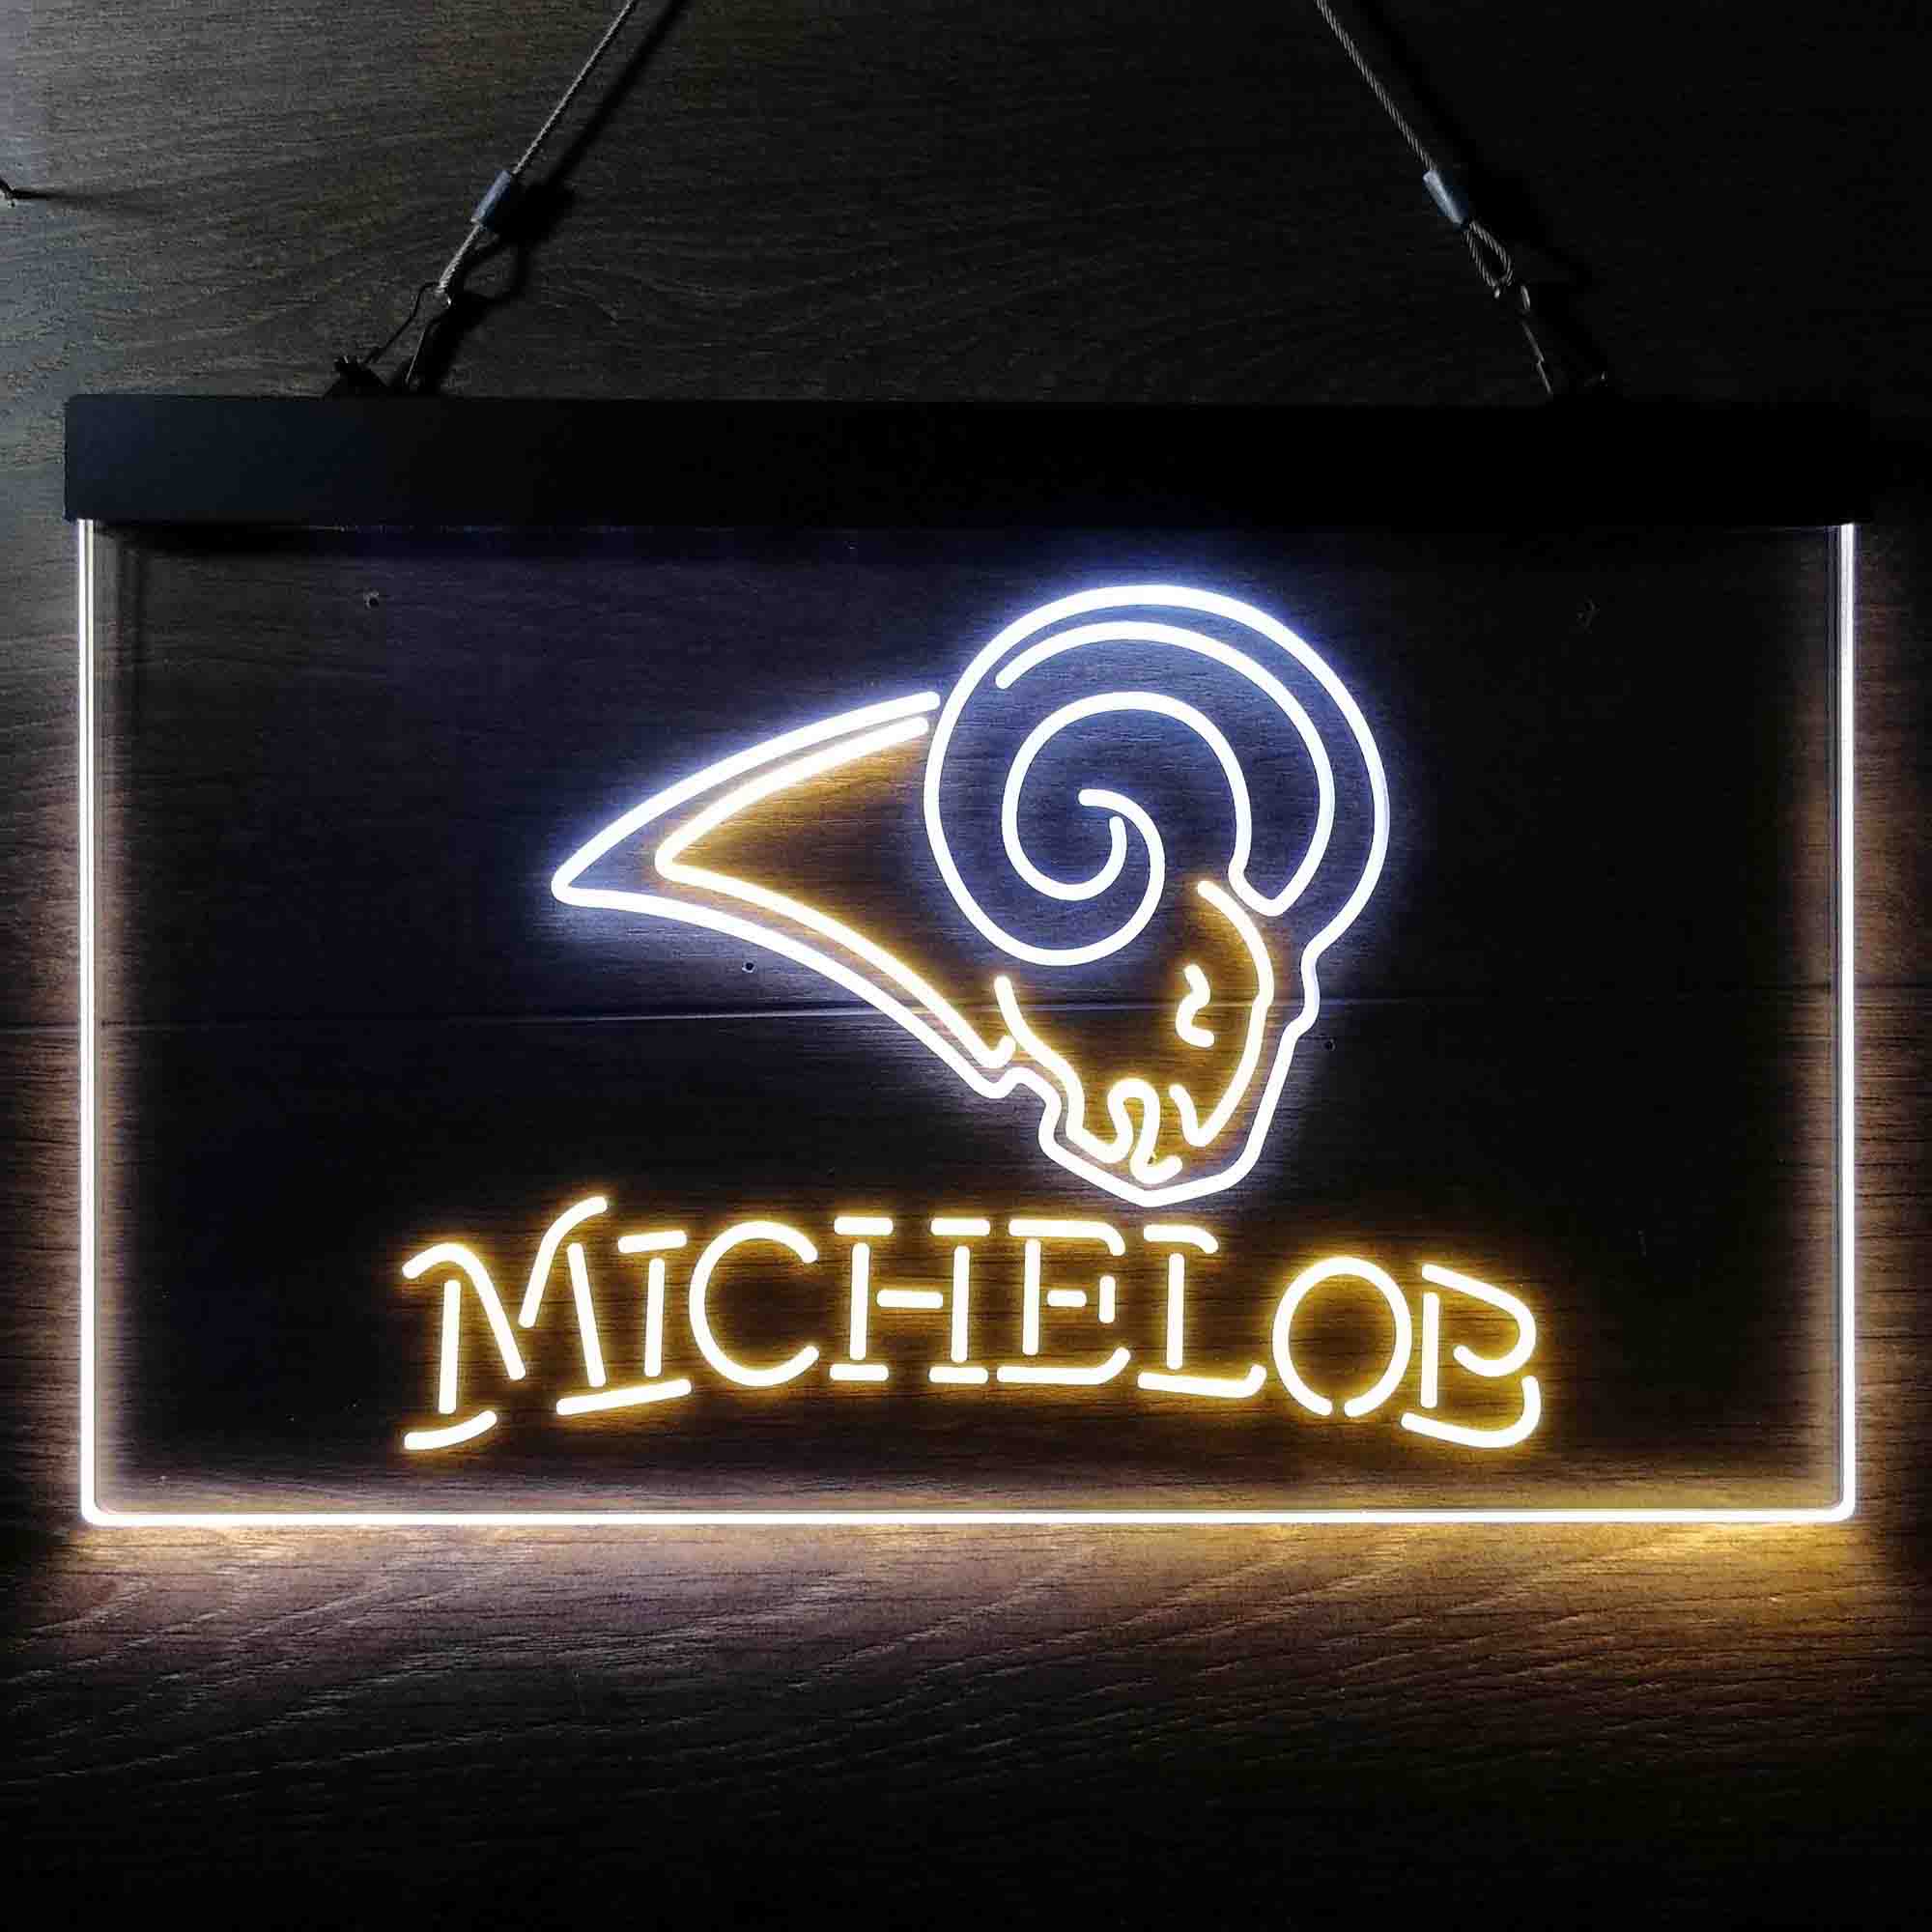 Michelob Bar Los Angeles Rams Est. 1937 LED Neon Sign